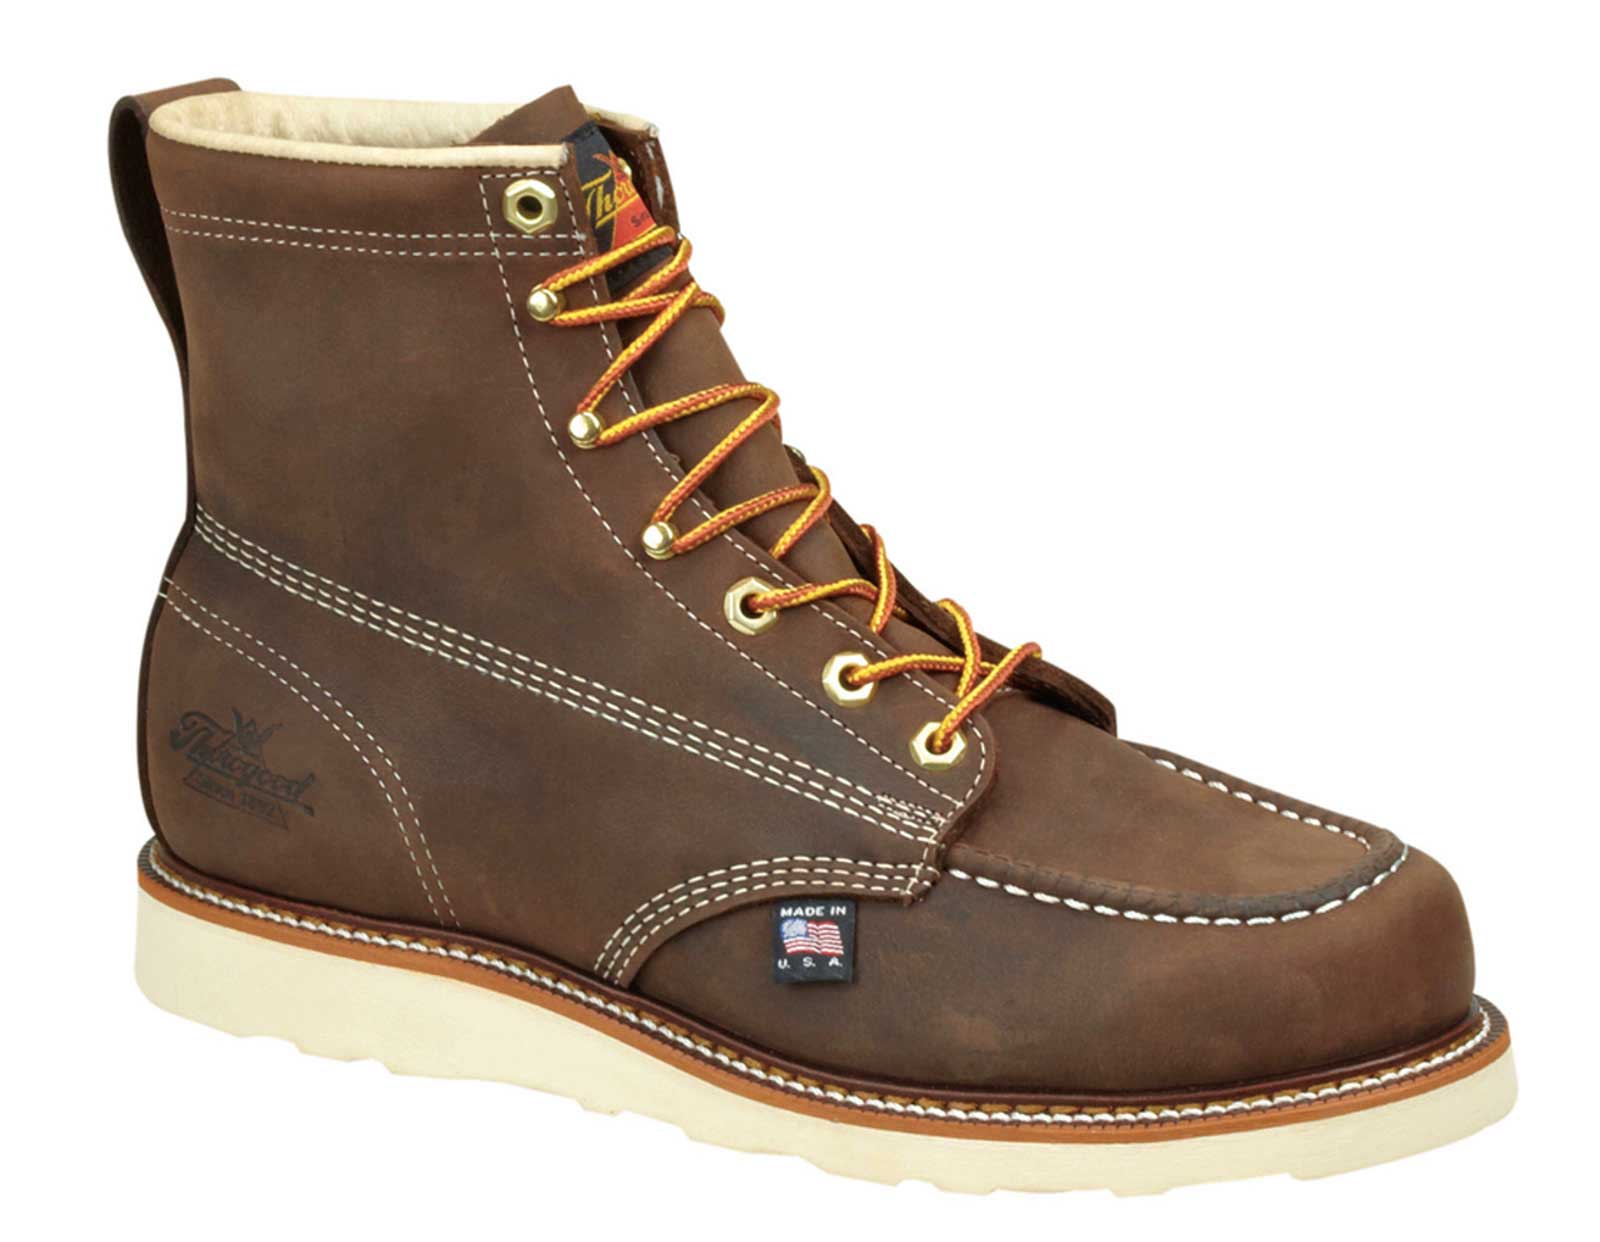 thorogood safety boots